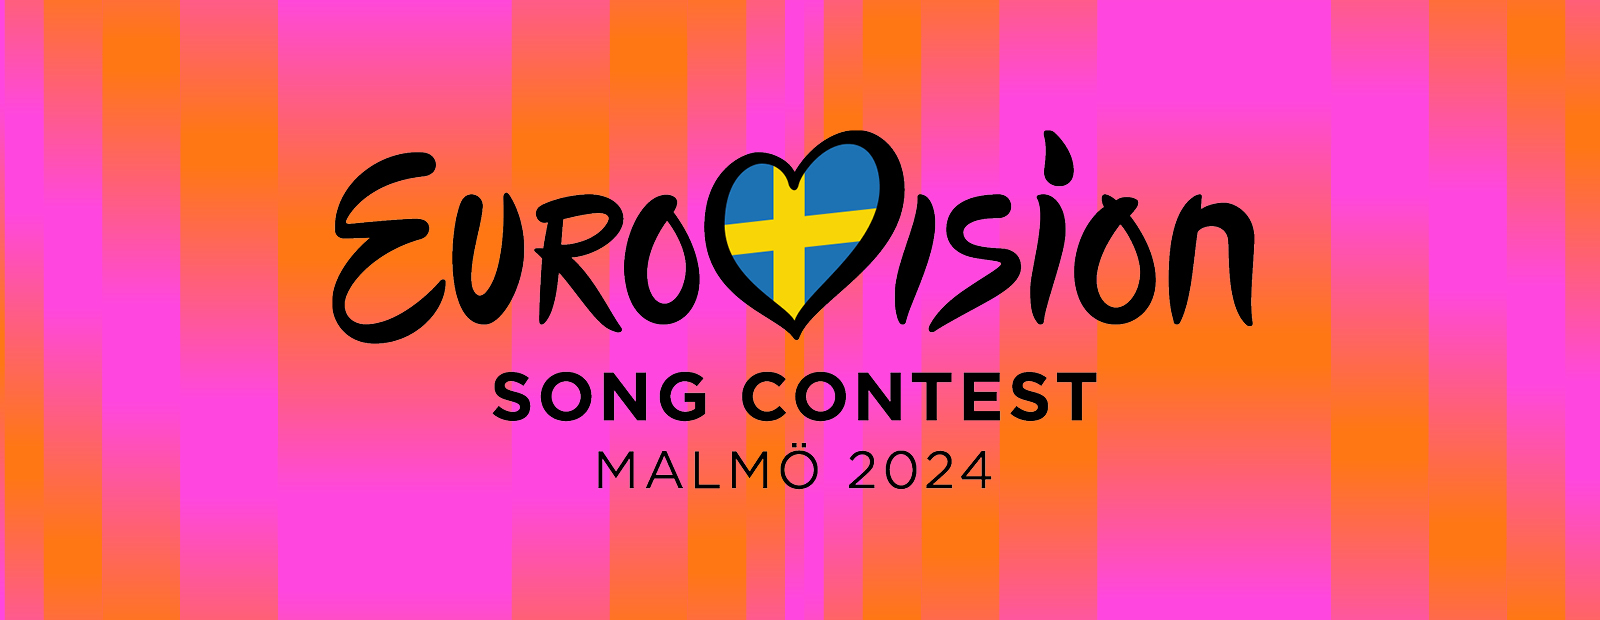 Eurovision Song Contest 2024 Semifinal 2 - Live Show